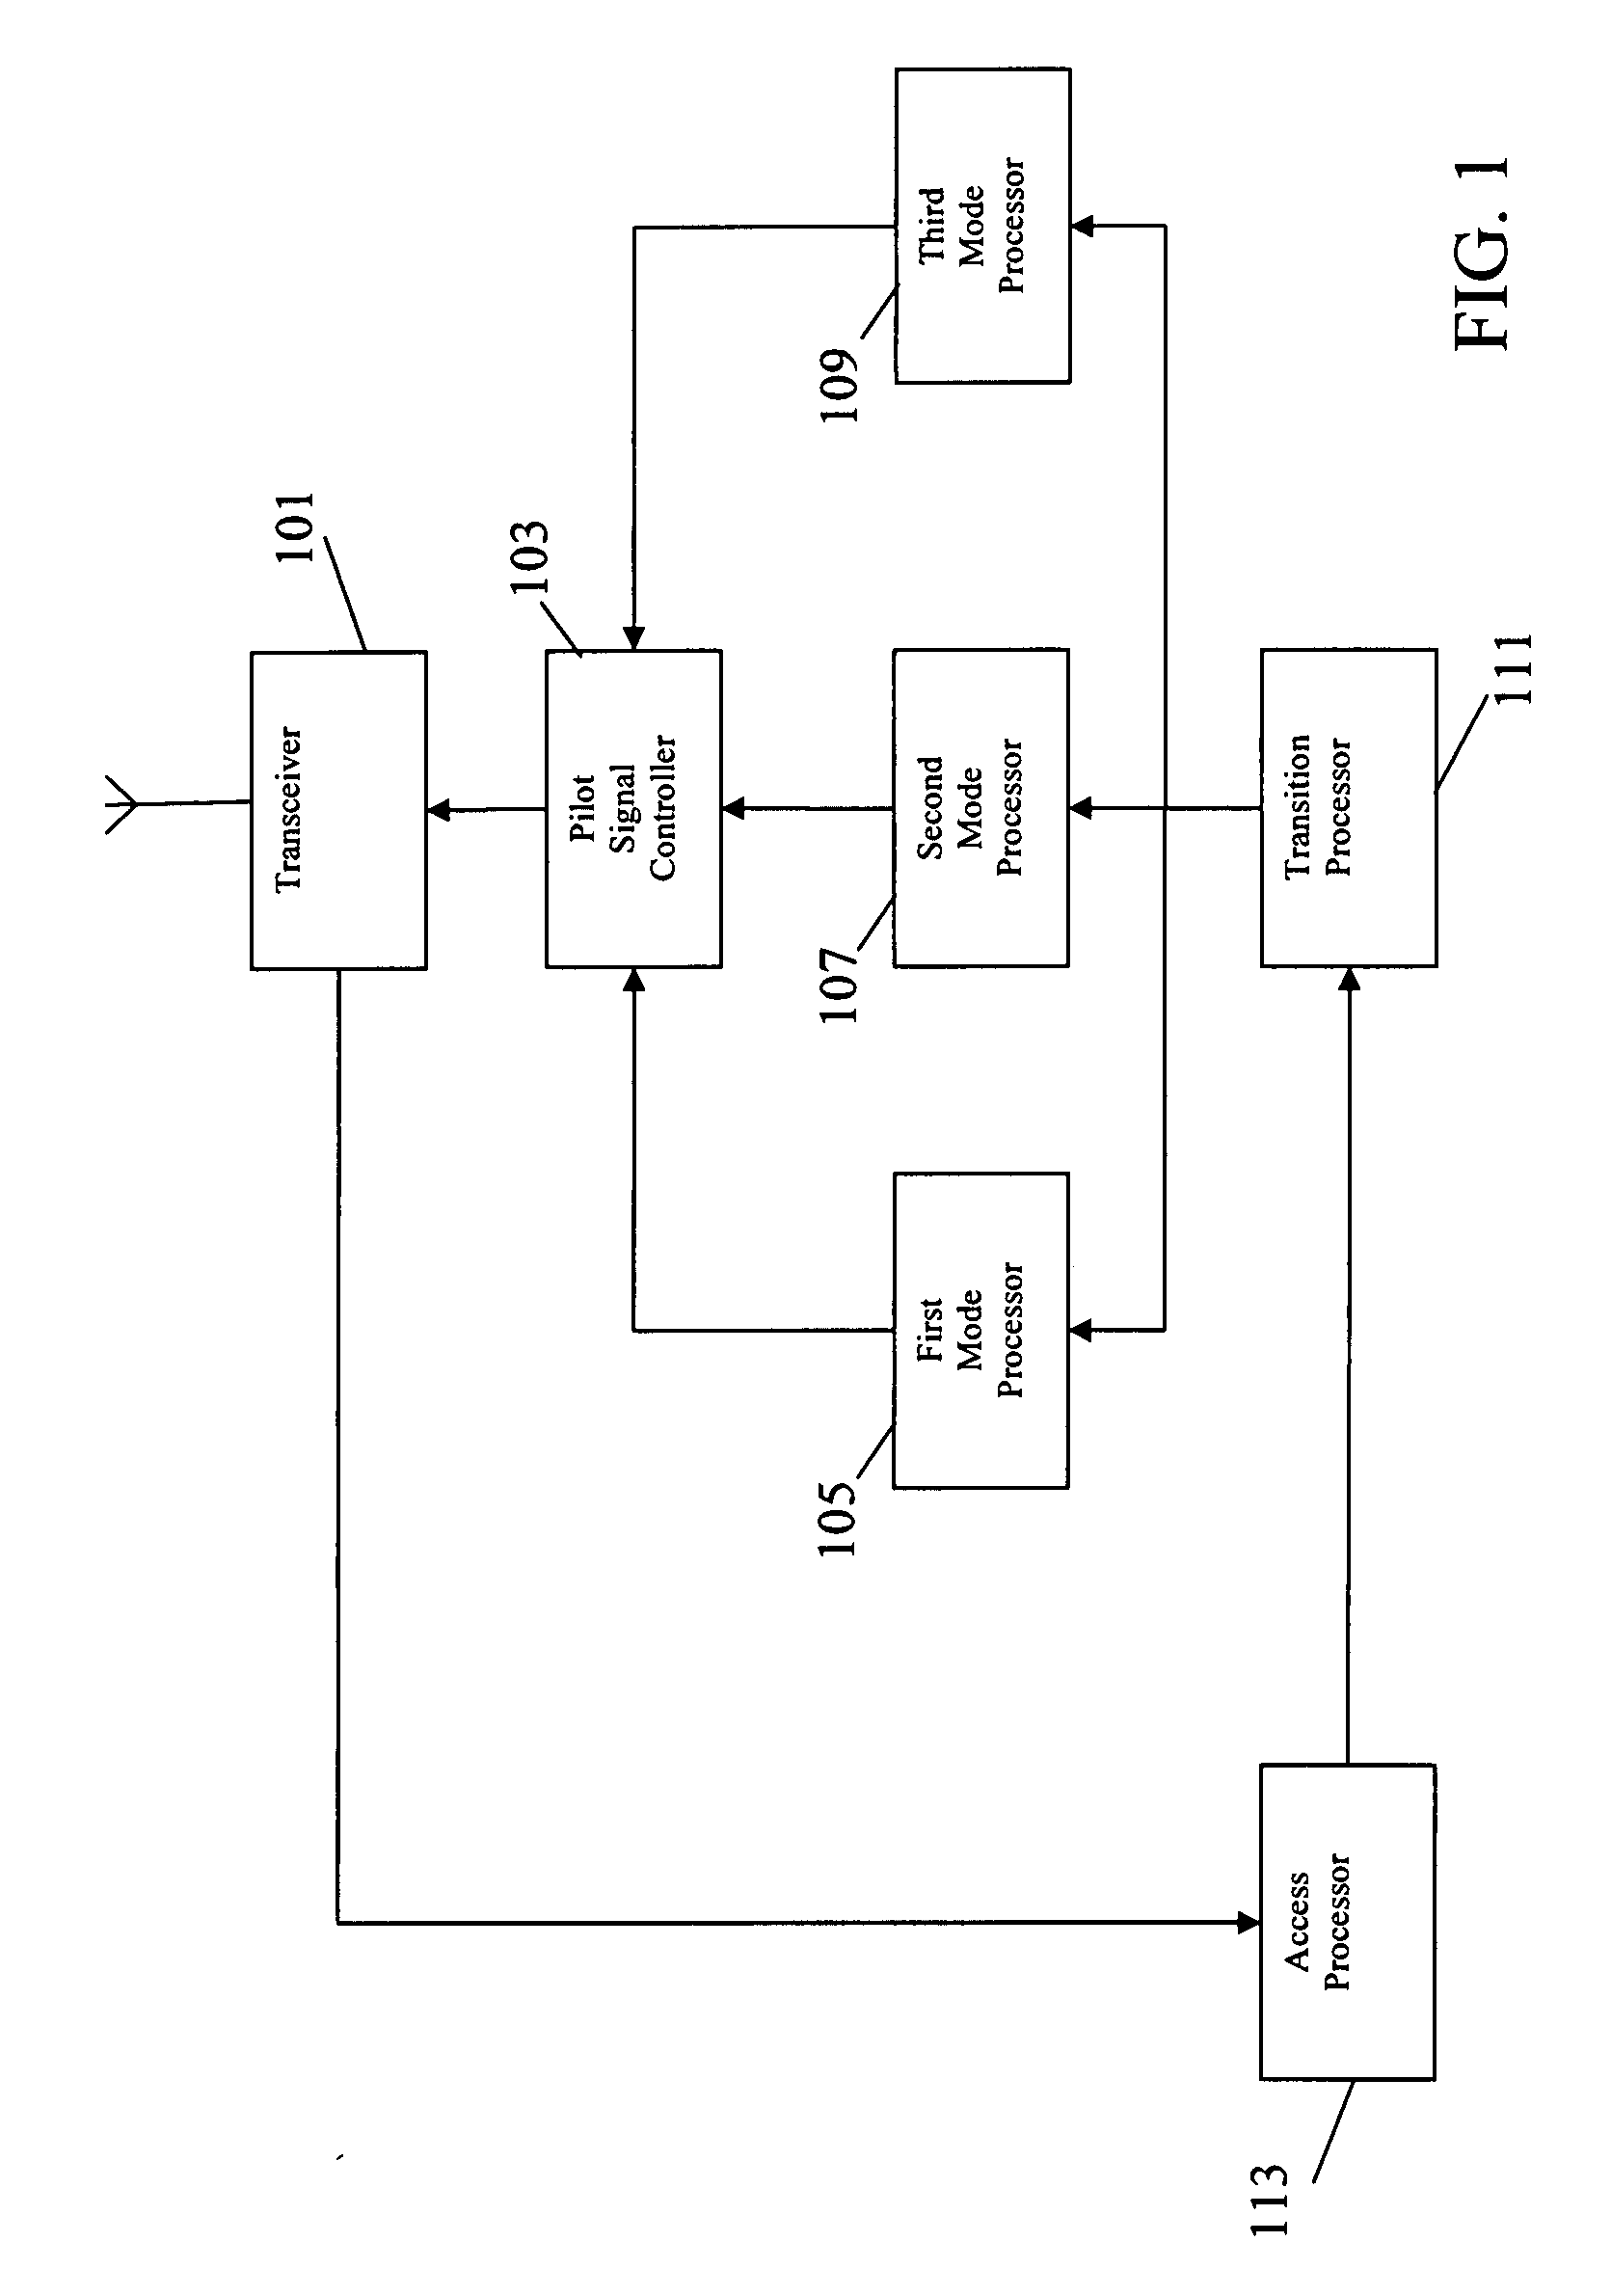 Pilot signal transmission in a radio communication system